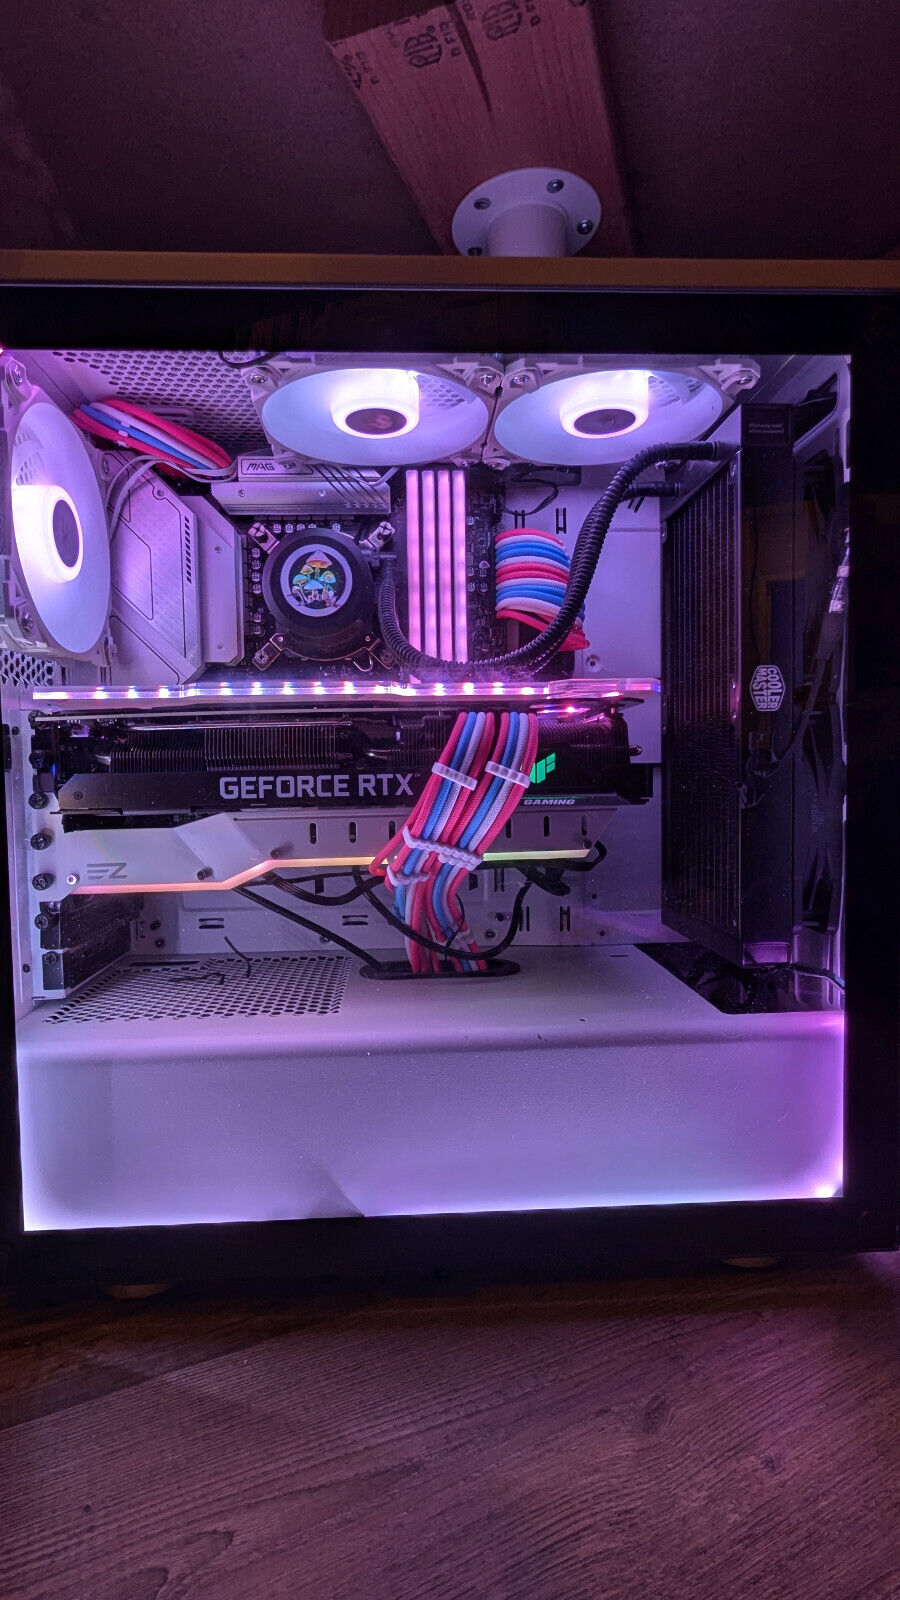 Hand built gaming PC, Used, white chasis, RTX 3070ti, lots of RAM and storage.